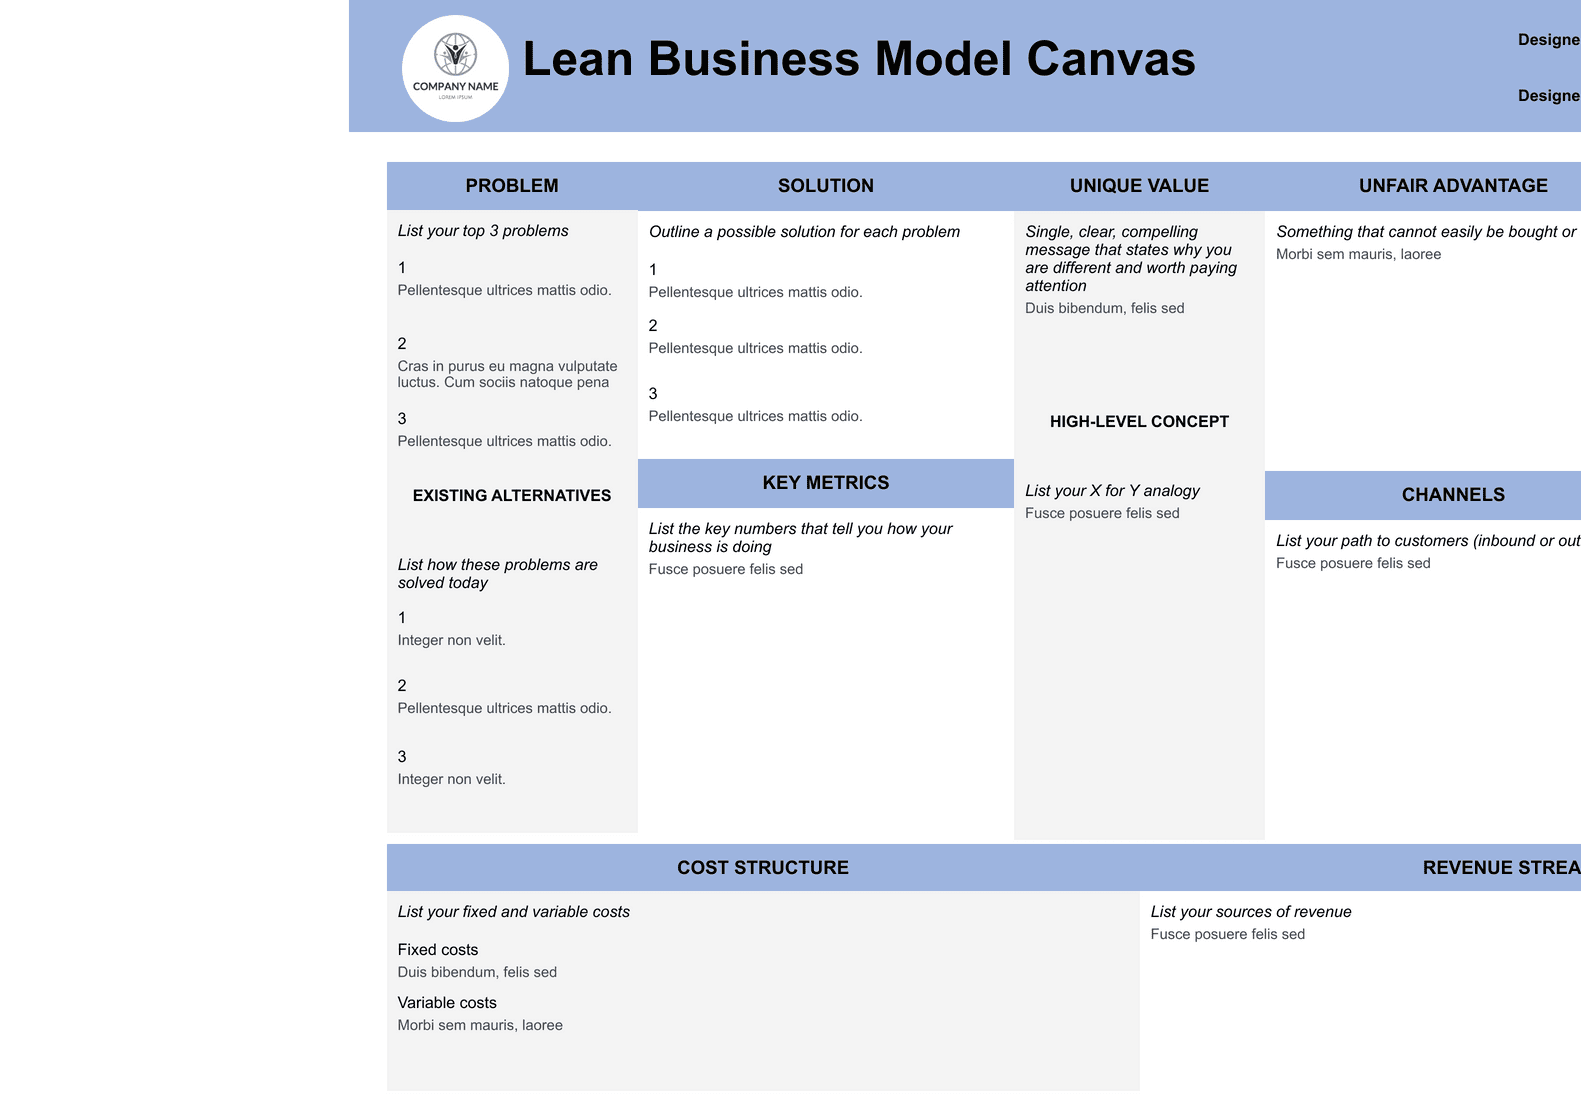 the lean business plan template